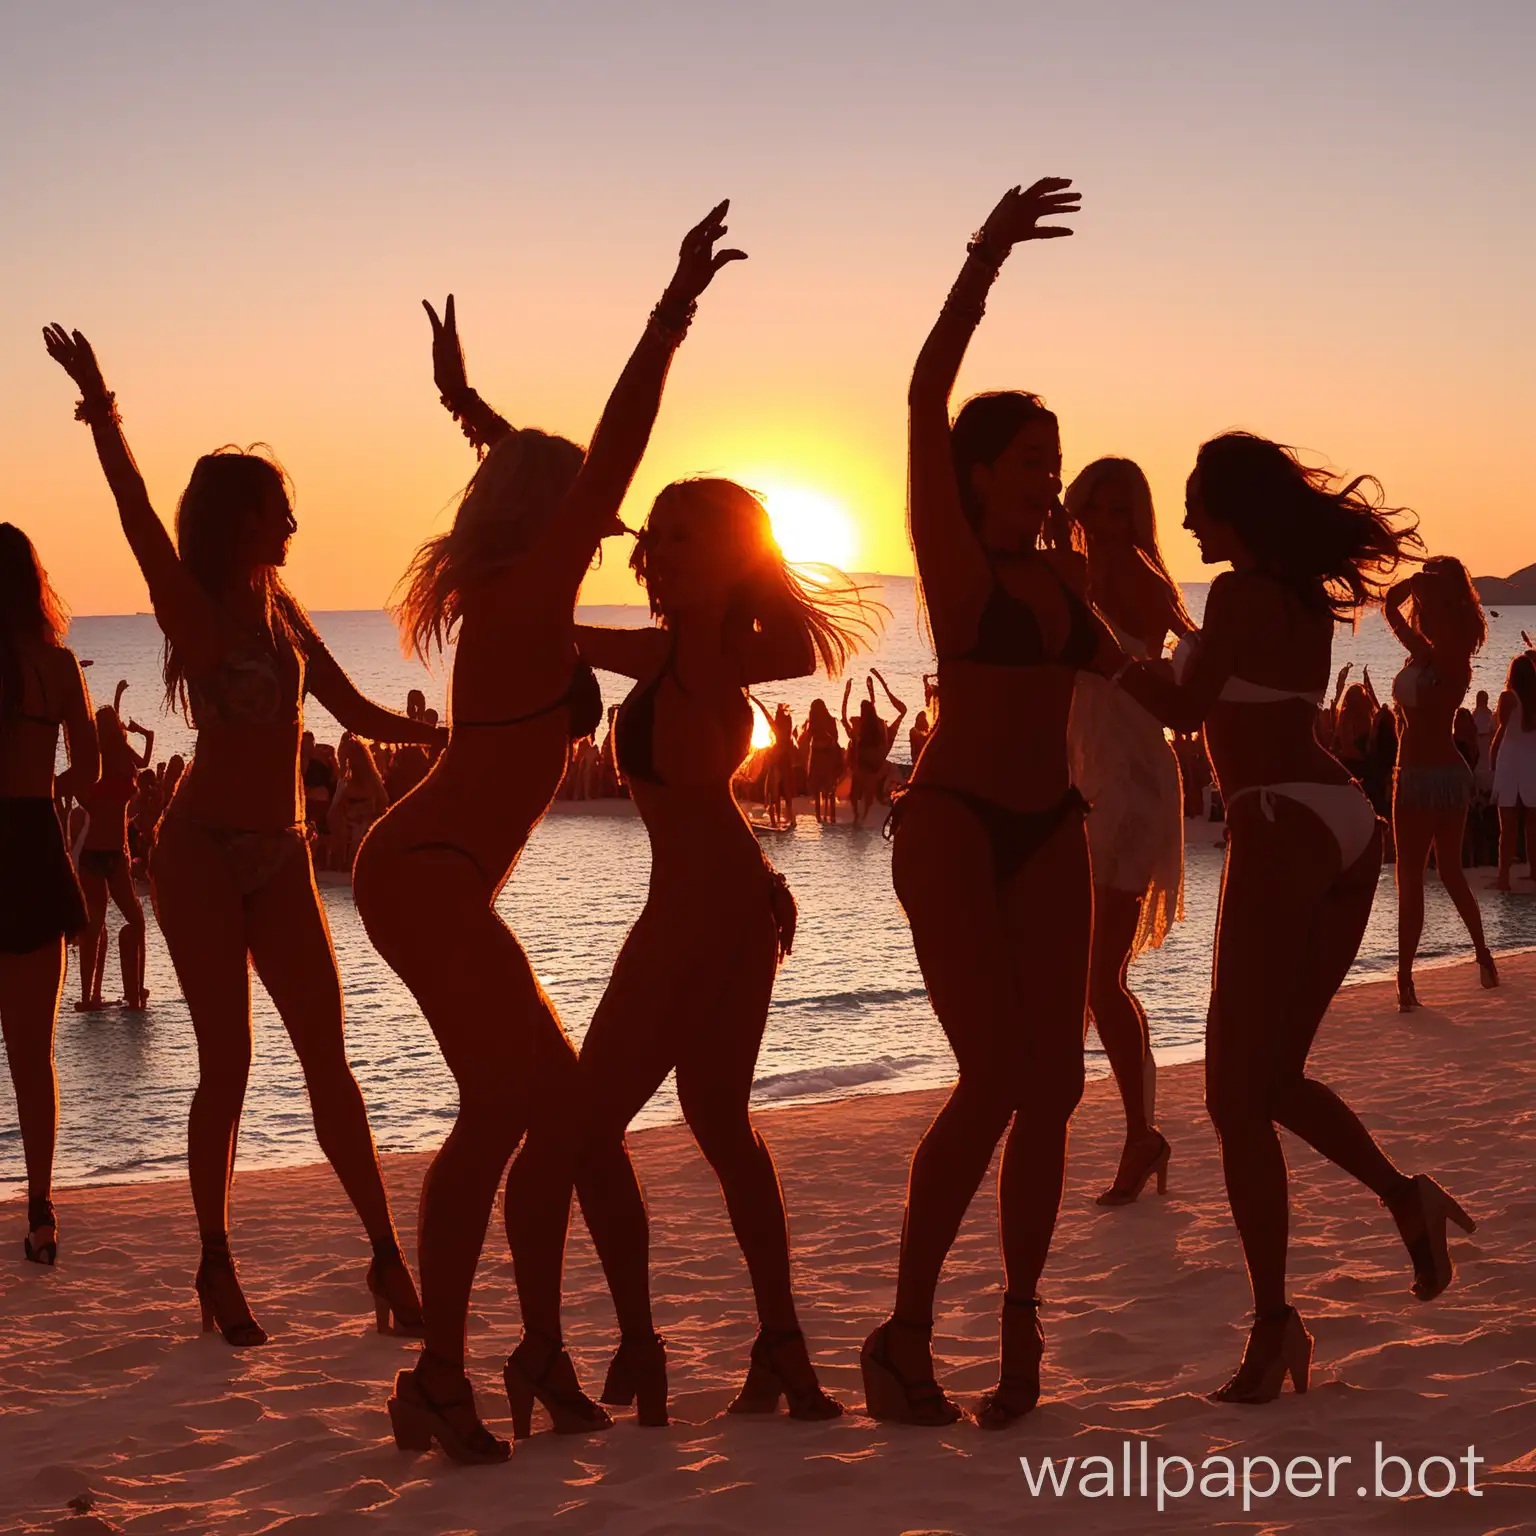 Sunset-Ibiza-Beach-Party-Vibrant-Atmosphere-with-Dancing-Girls-and-Sunset-View